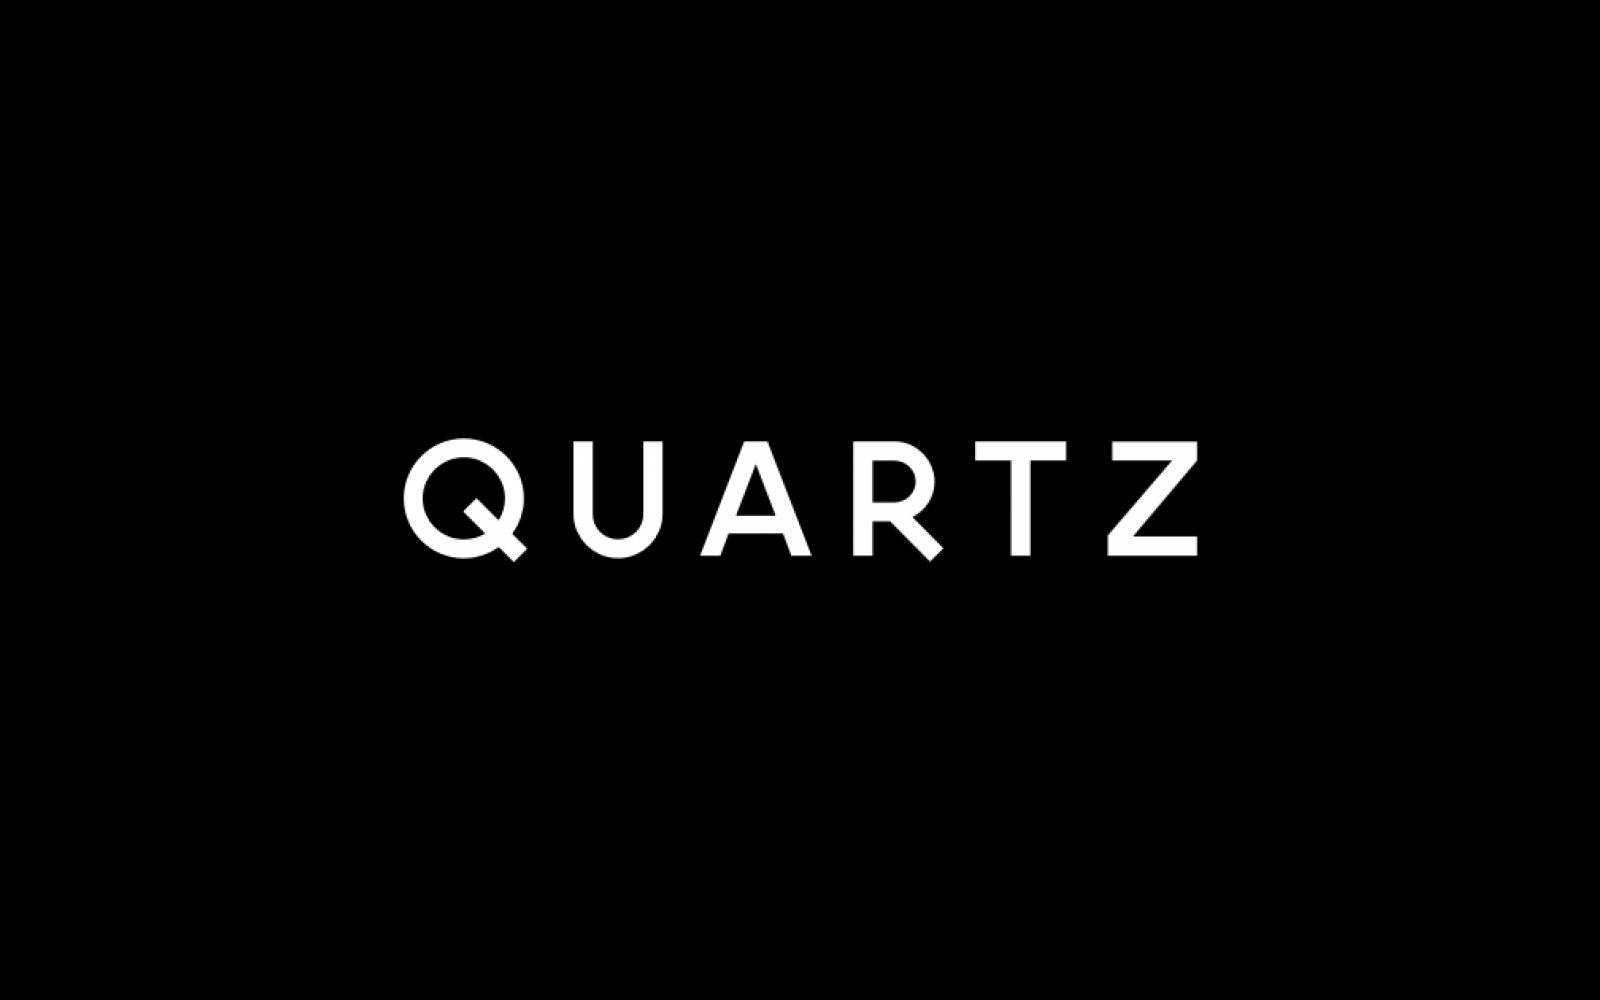 Logo for the business journal Quartz. Black rectangle with capital white letters in the middle saying "QUARTZ"